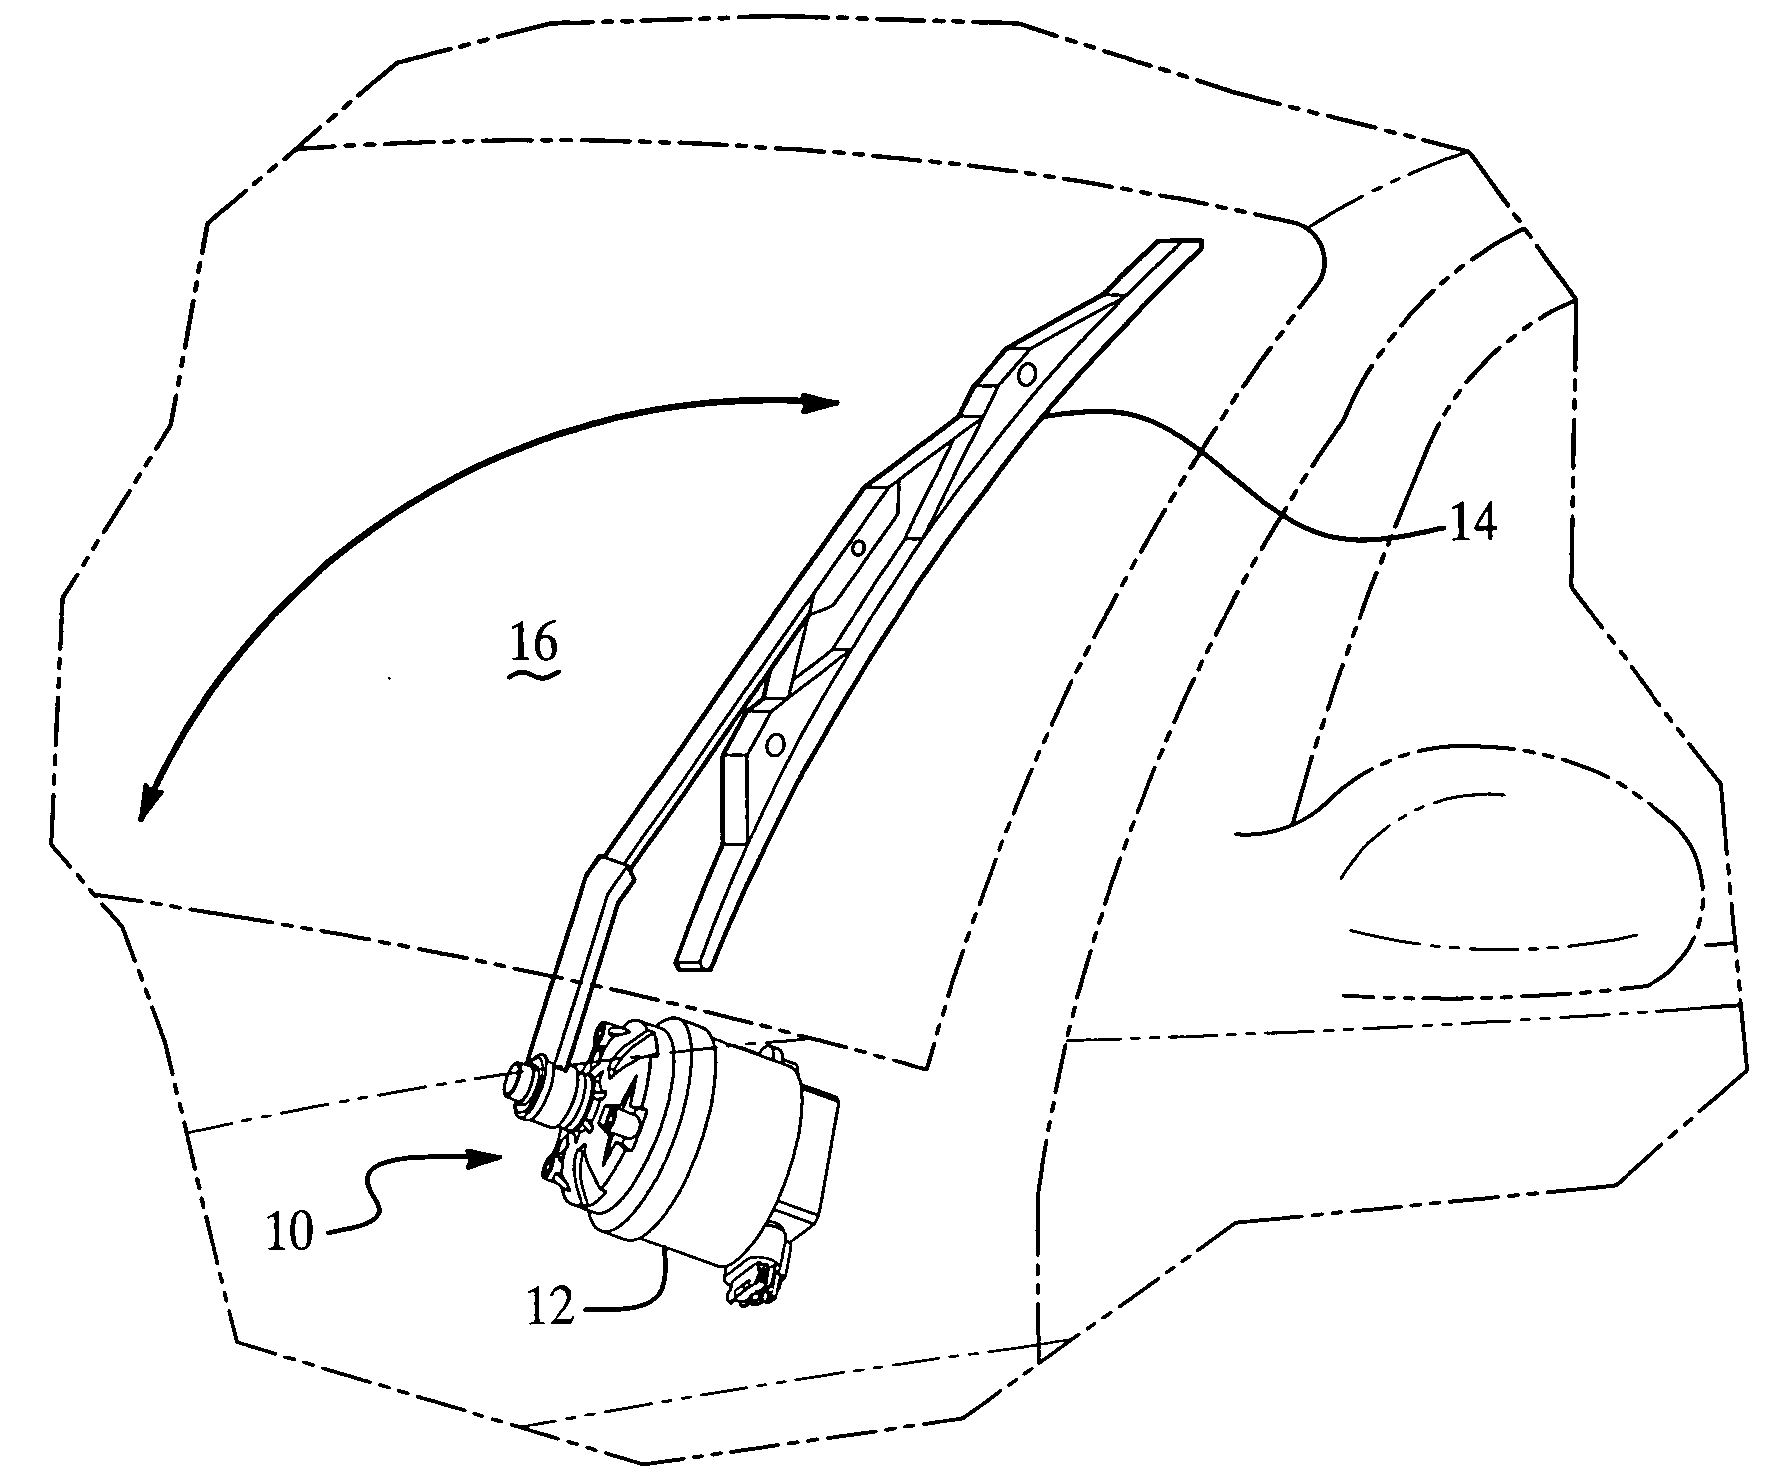 Direct drive windshield wiper assembly